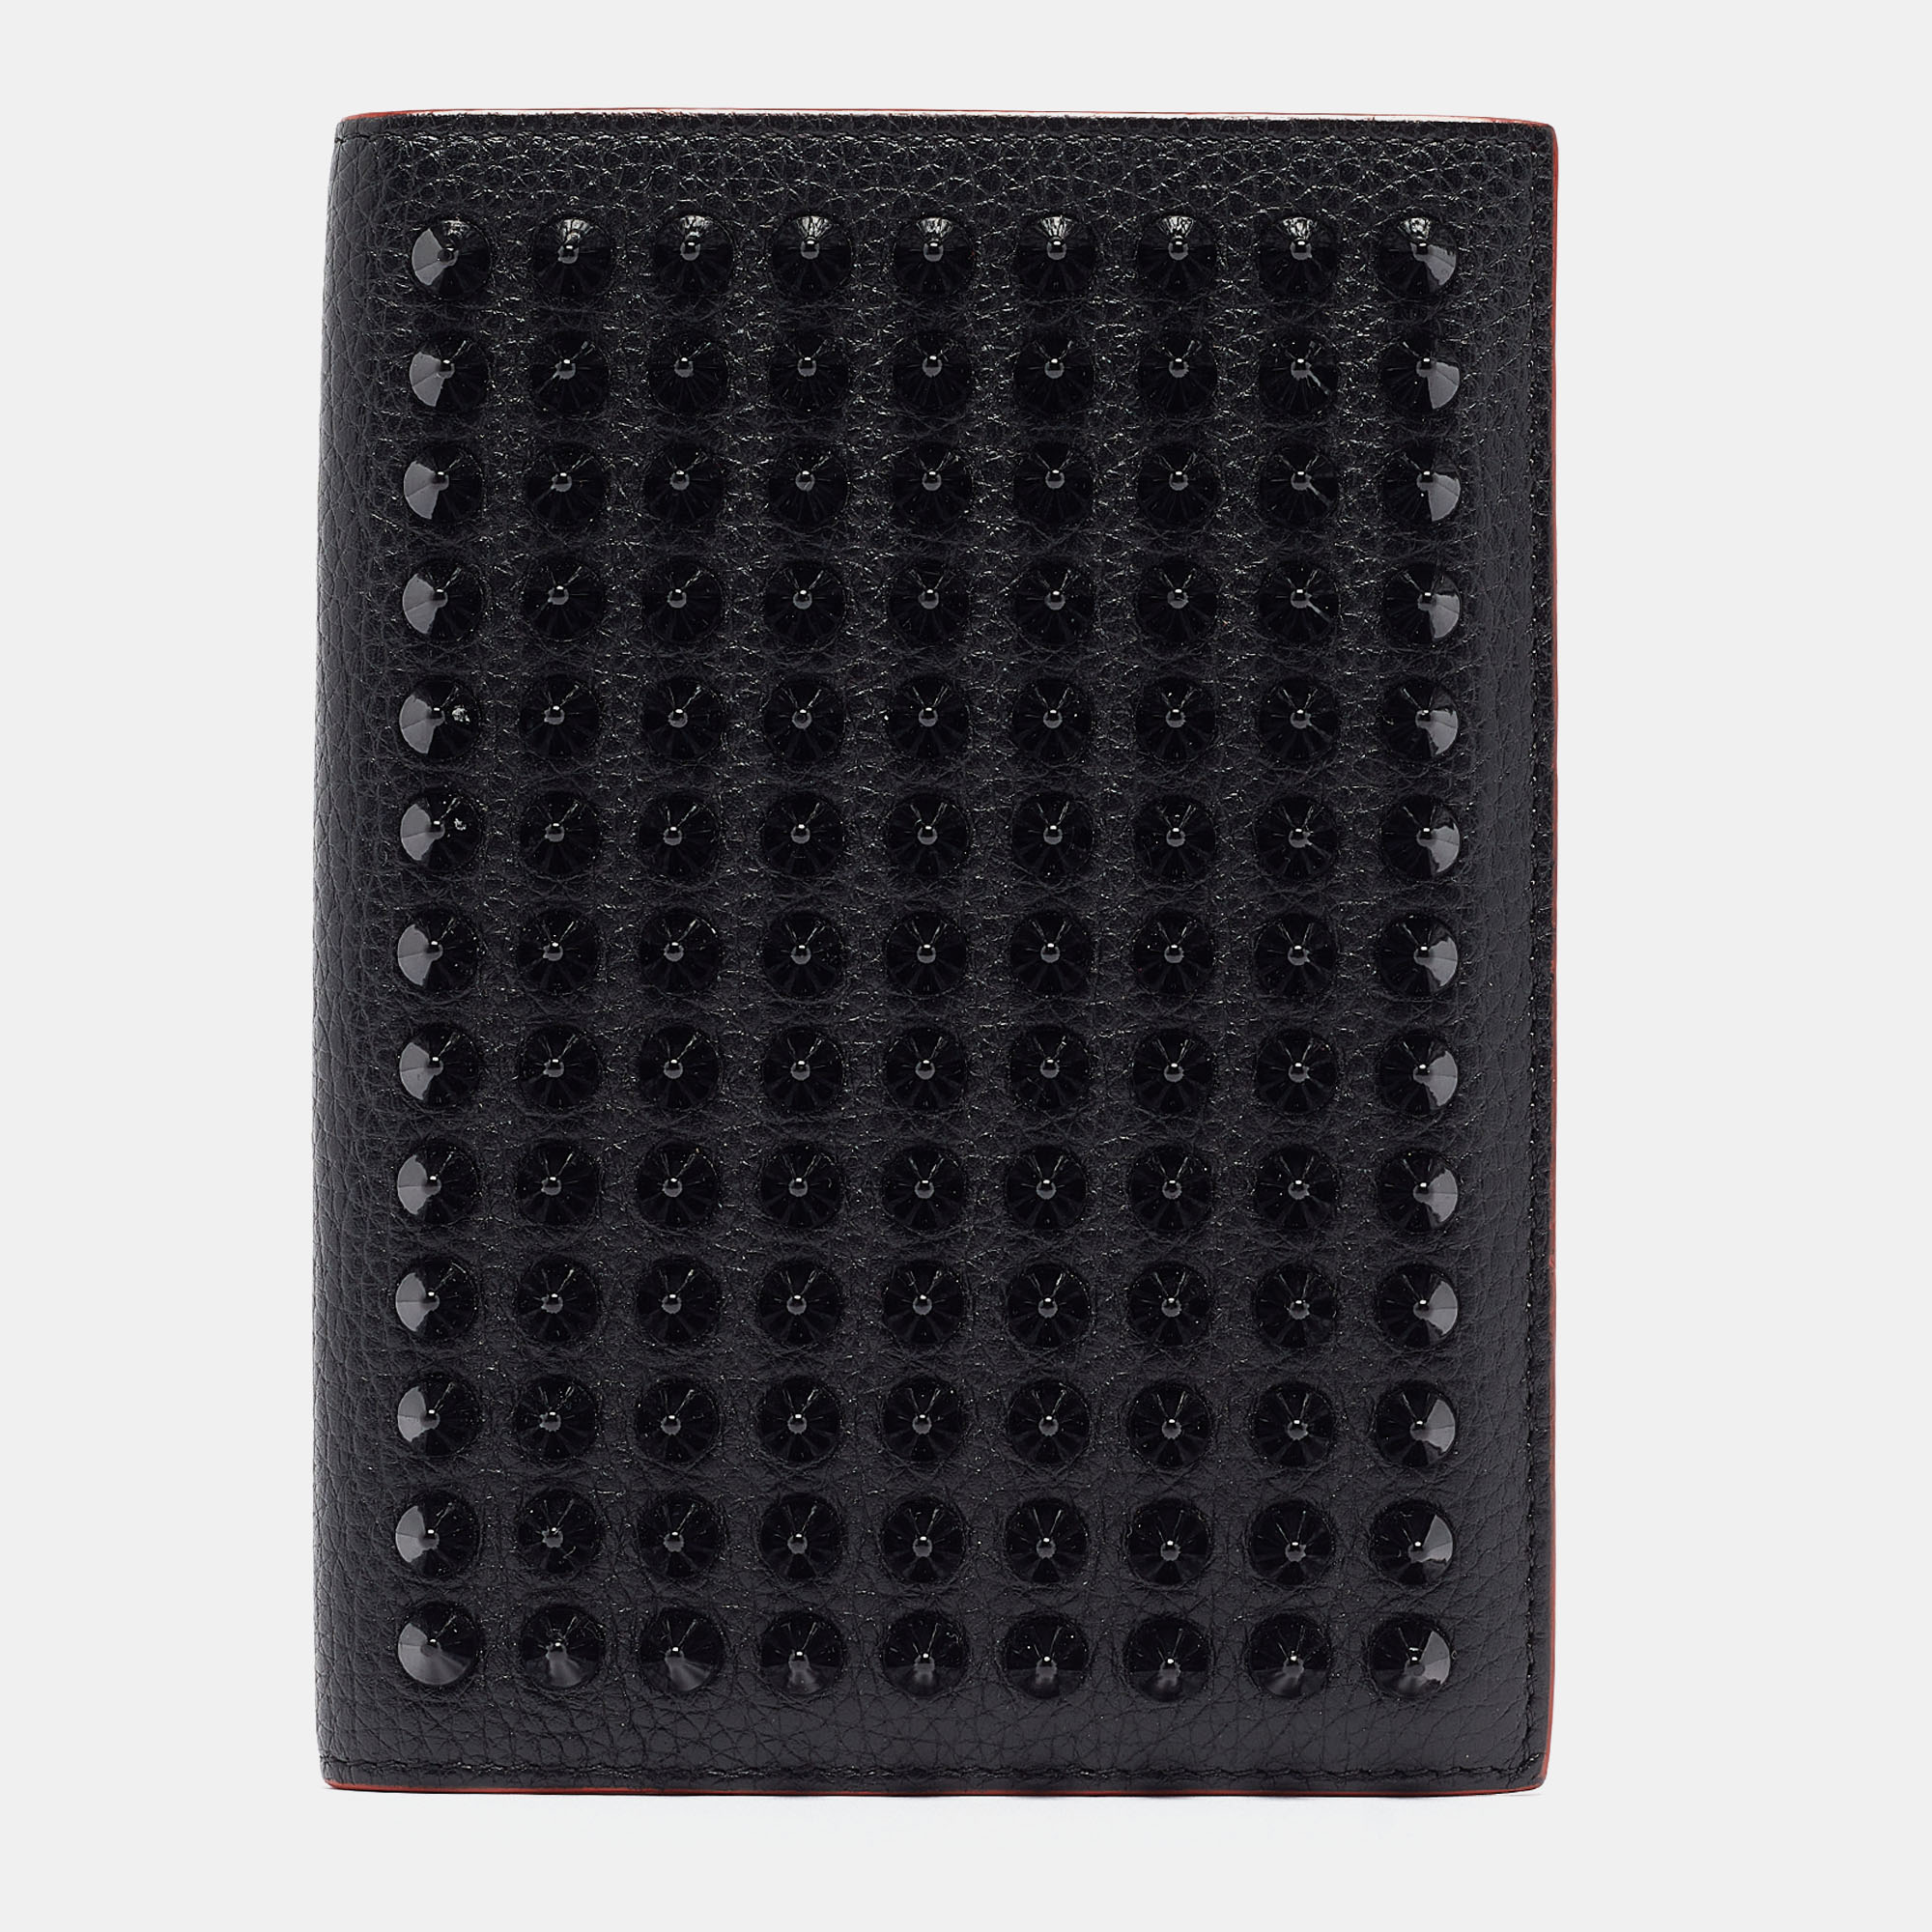 Pre-owned Christian Louboutin Black Leather Empire Spikes Passport Holder